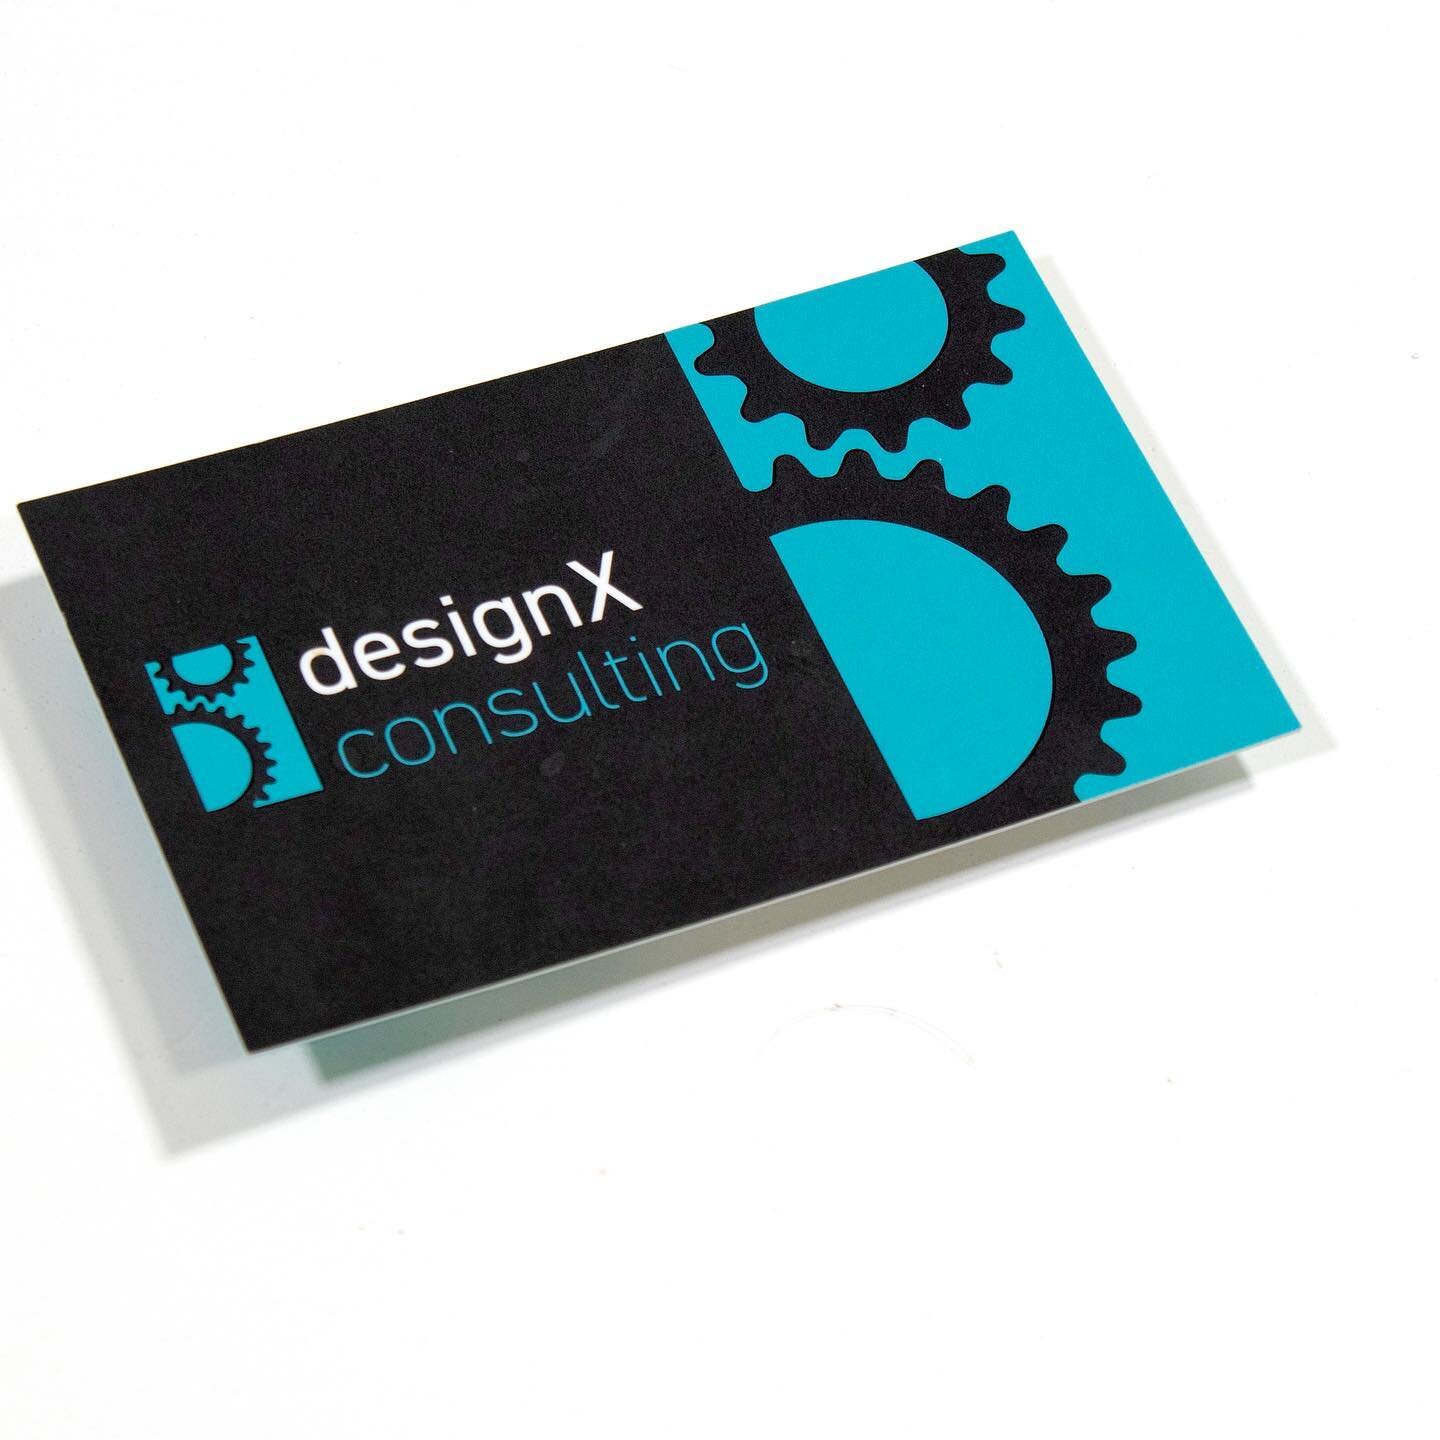 &lsquo;DesignX Consulting&rsquo; brand refresh completed and website launched. Daniel at DesignX is a mechanical and structural engineer and a fellow moto-enthusiast! Visit www.designxconsulting.com.au to see more. #ttc #talltreecreative #branding #g